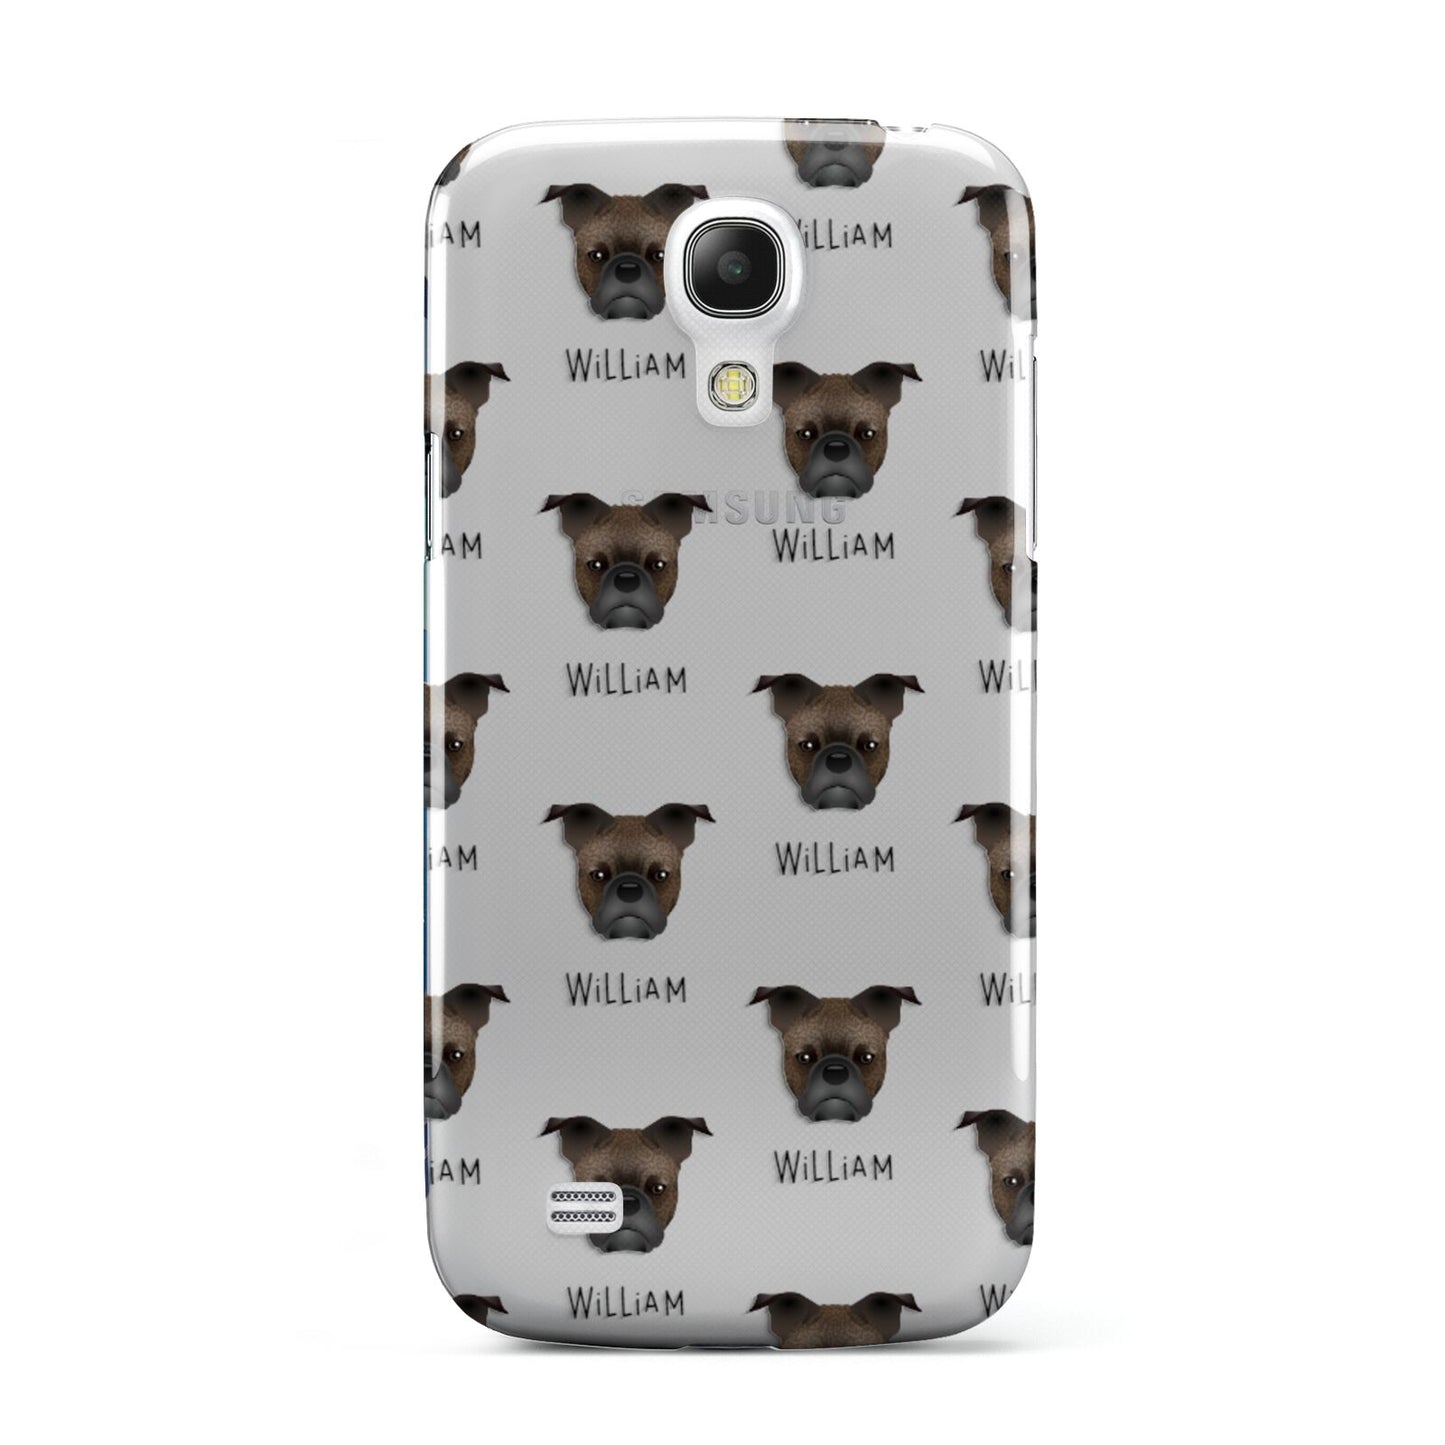 Frug Icon with Name Samsung Galaxy S4 Mini Case